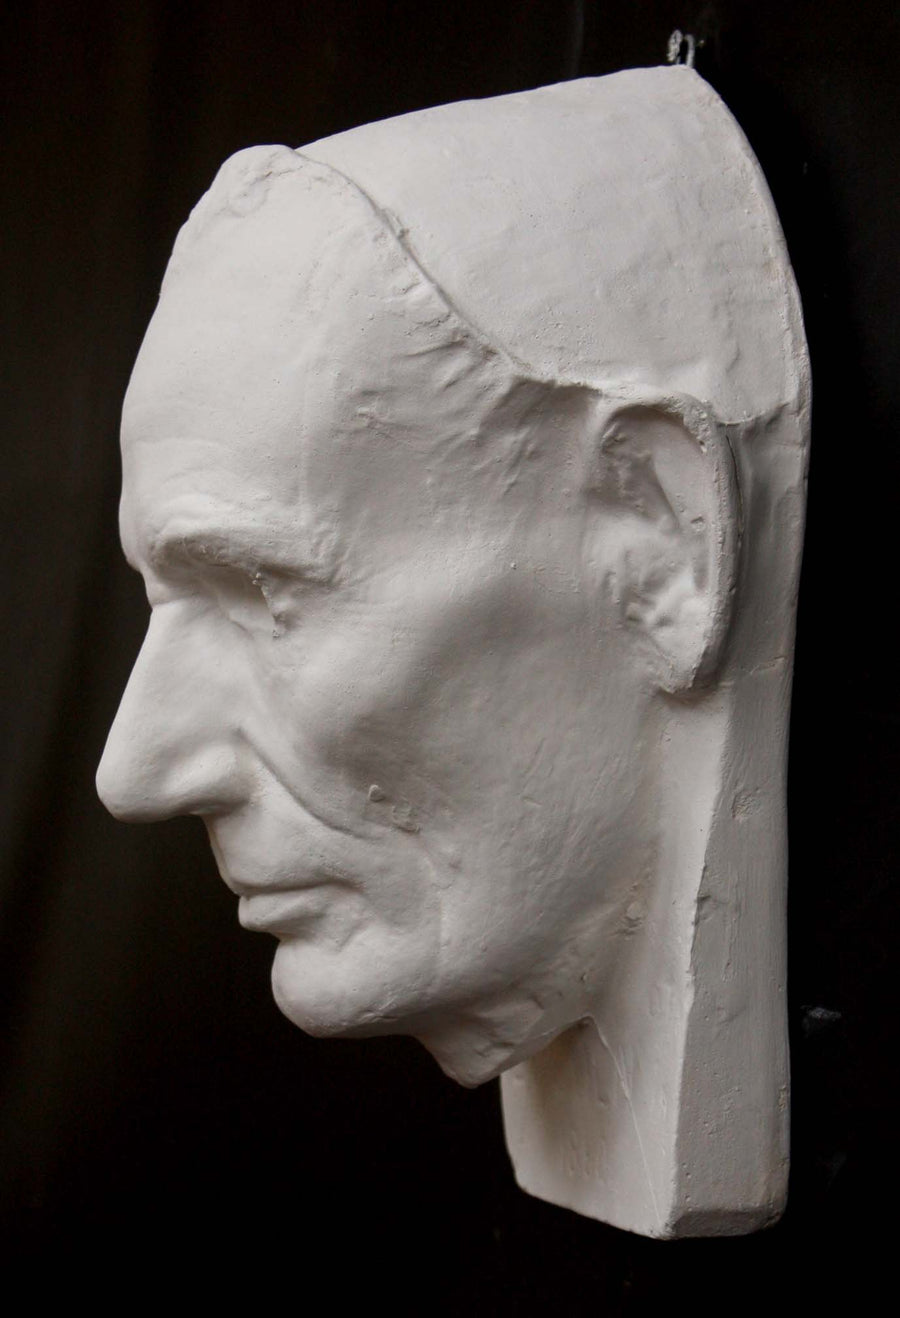 Photo of plaster cast sculpture of life mask of Abraham Lincoln from a side view on a black background